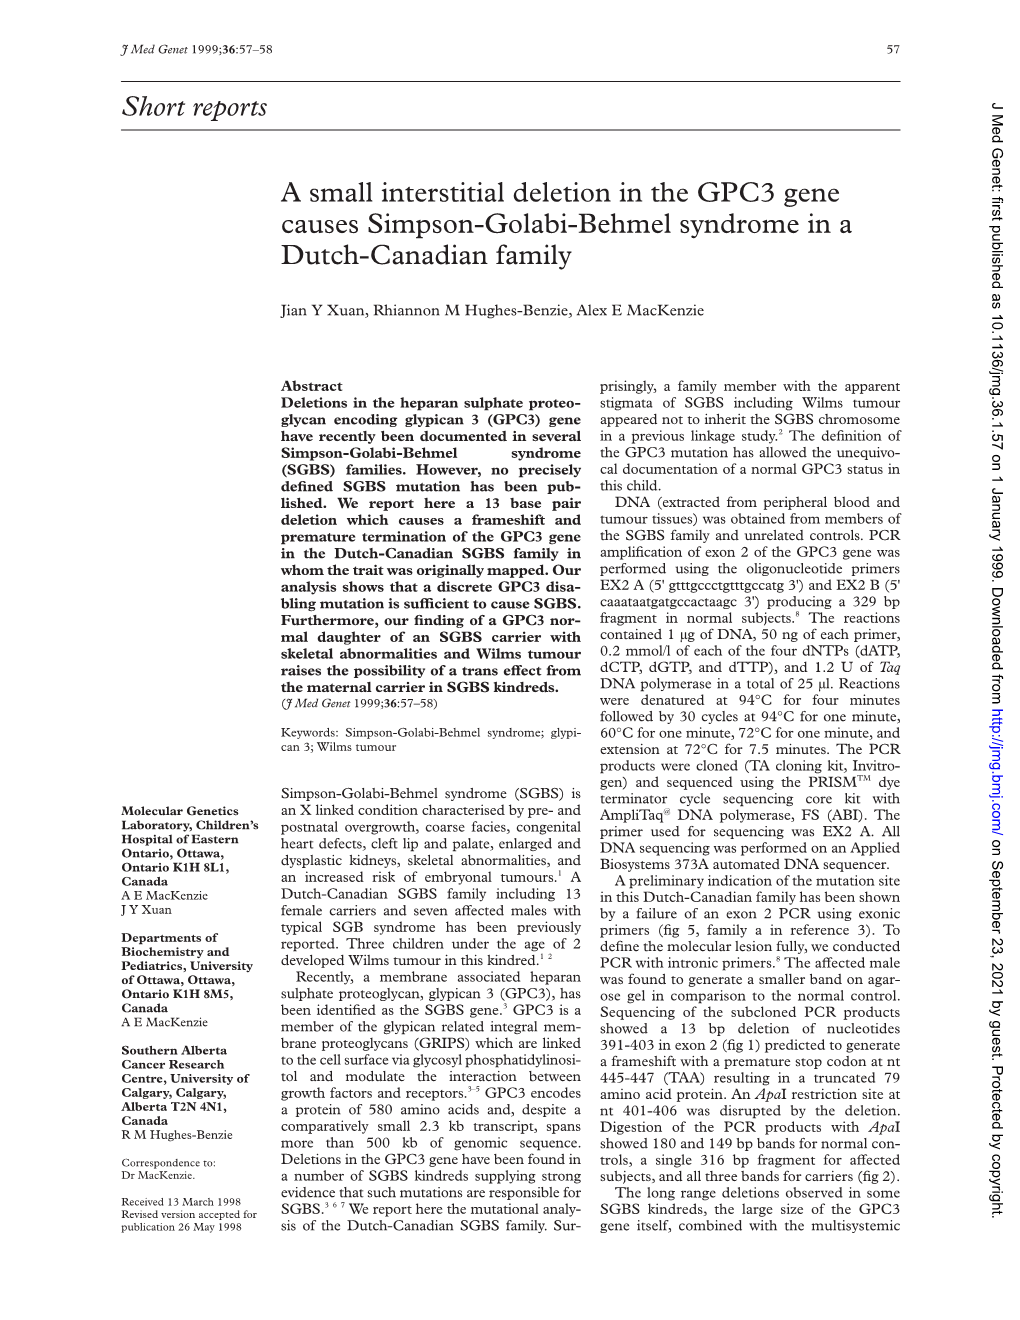 Short Reports a Small Interstitial Deletion in the GPC3 Gene Causes Simpson-Golabi-Behmel Syndrome in a Dutch-Canadian Family